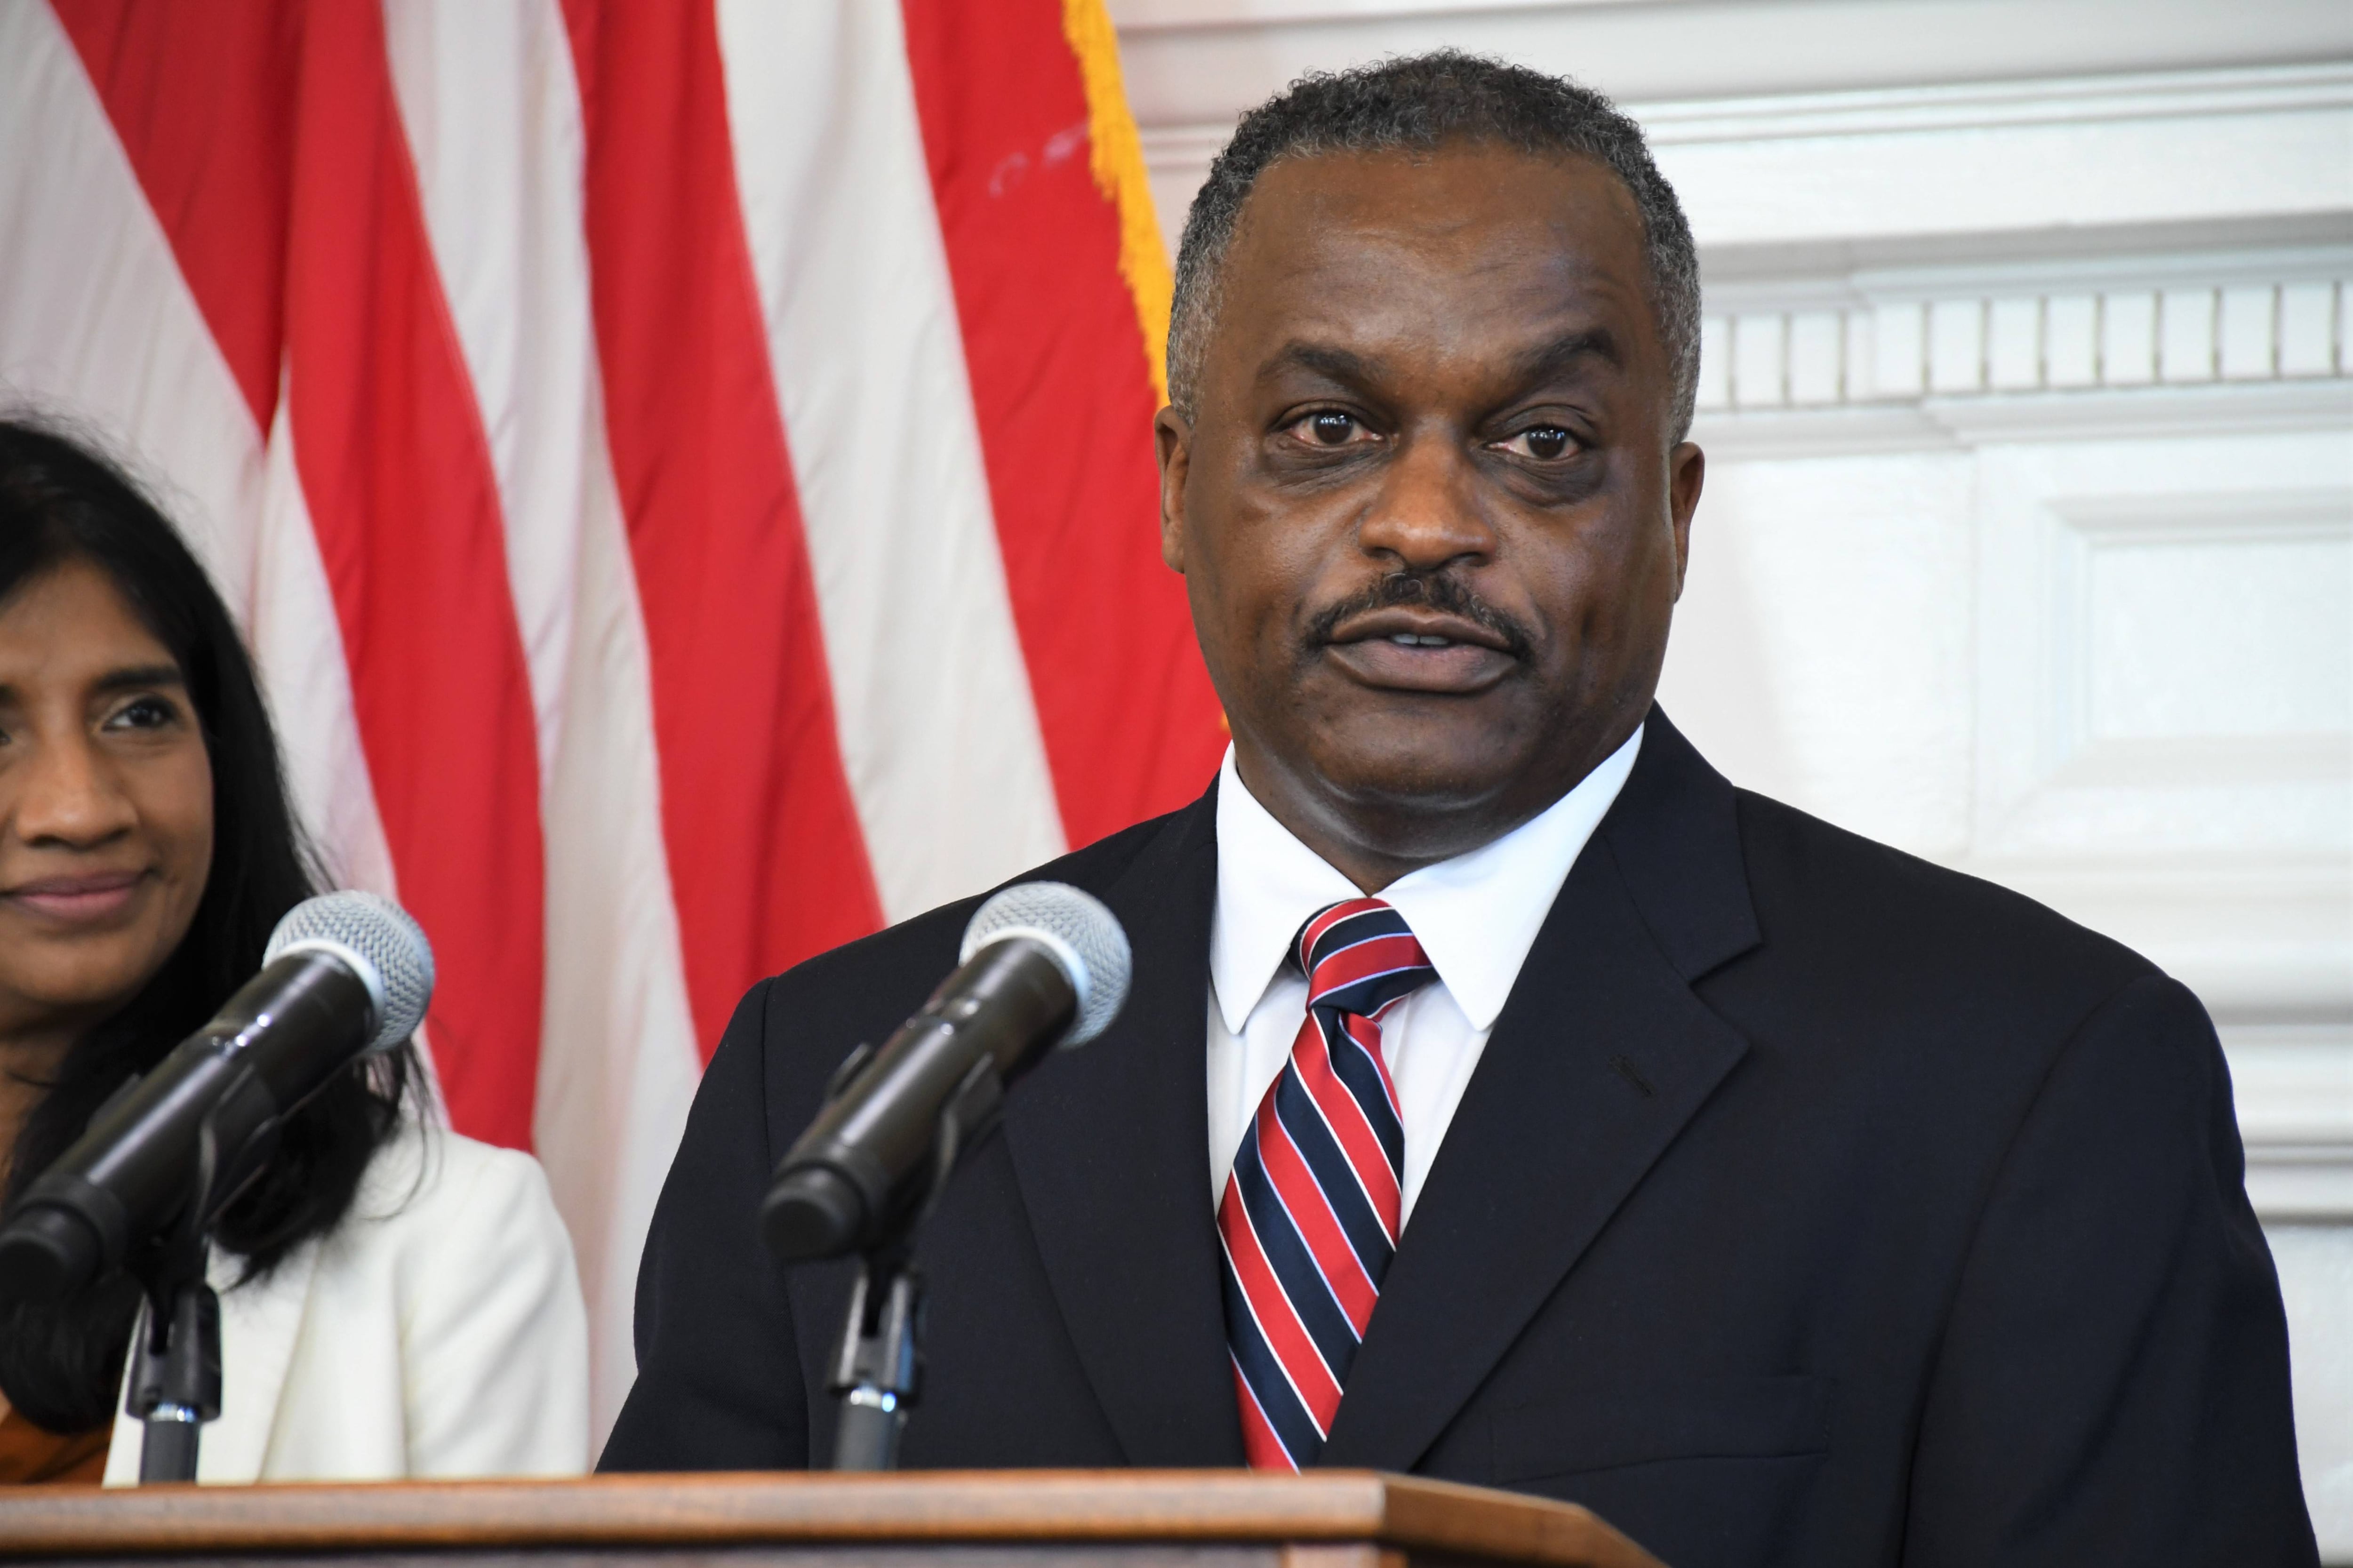 Roland Butler, who has been nominated to be superintendent of the Maryland State Police, speaks during a press conference at the State House in Annapolis on Thursday, Feb. 23, 2023.